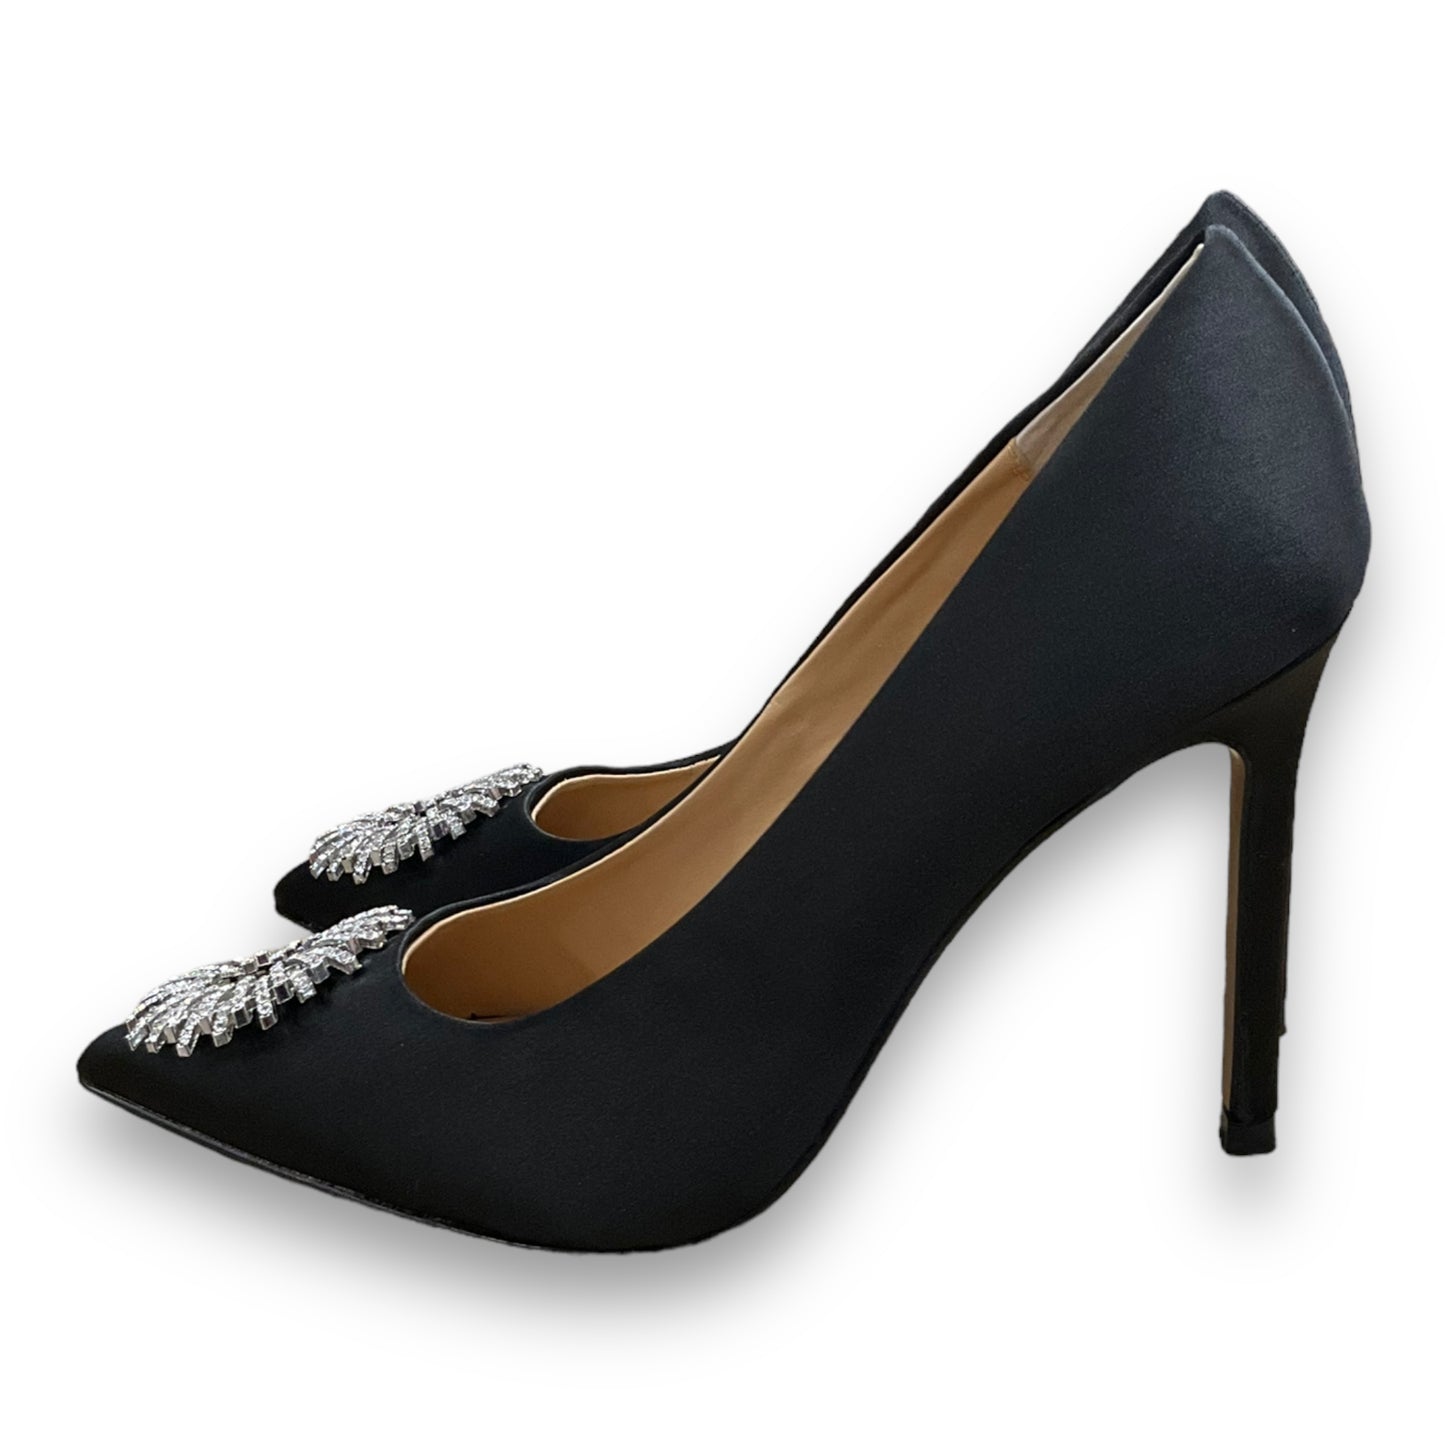 Shoes Heels Stiletto By Express  Size: 7